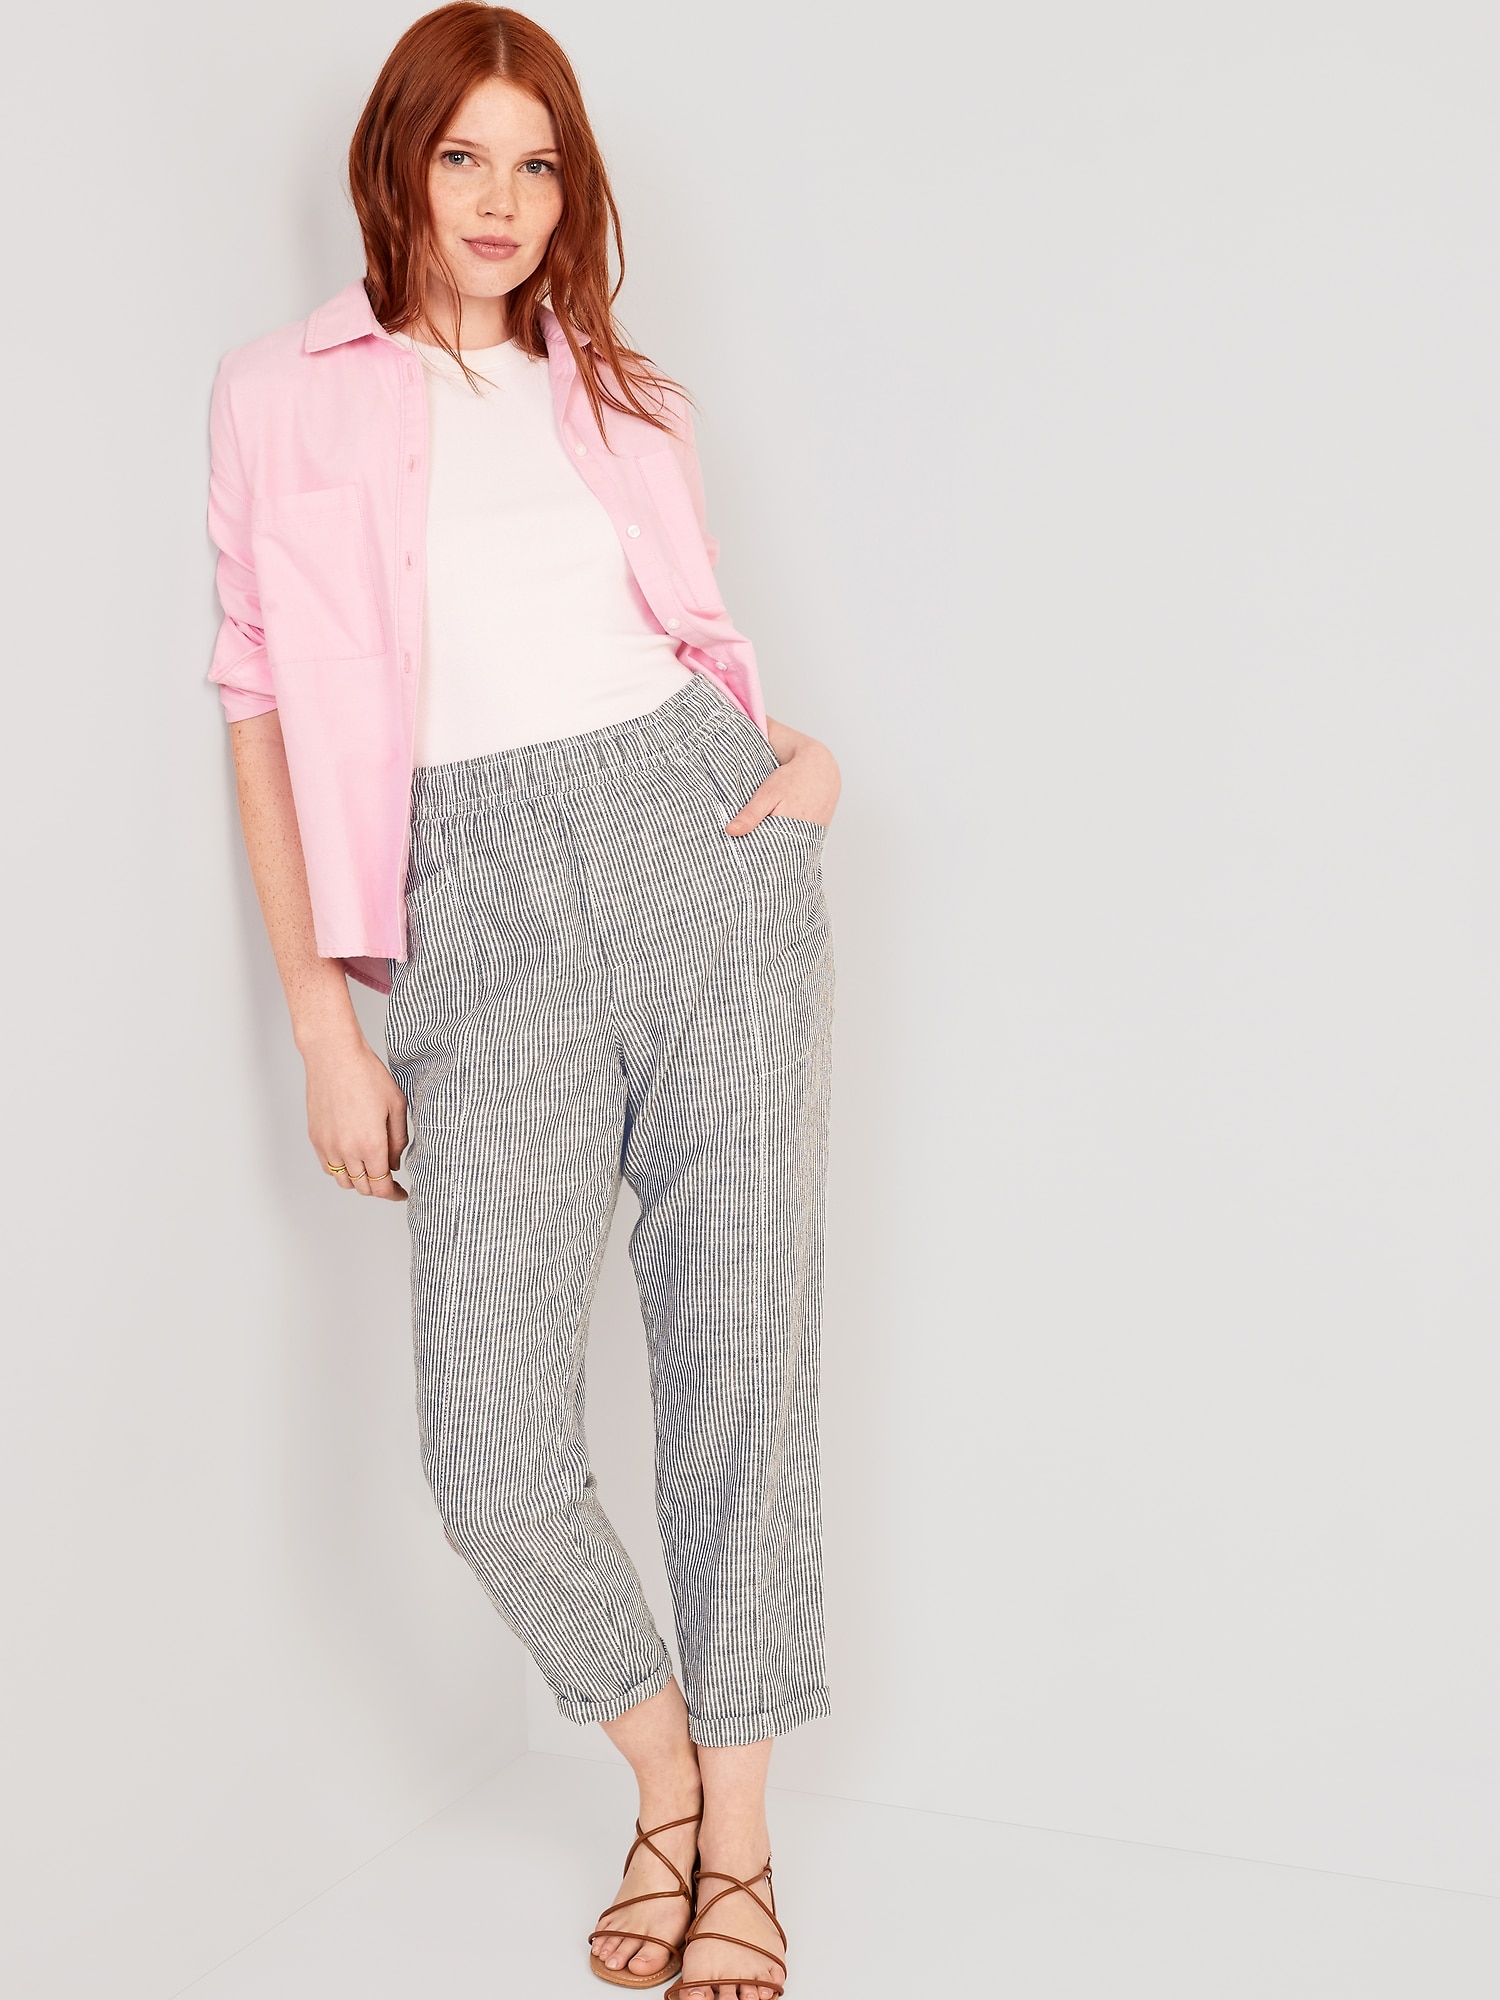 High-Waisted Striped Cropped Linen-Blend Tapered Pants for Women | Old Navy